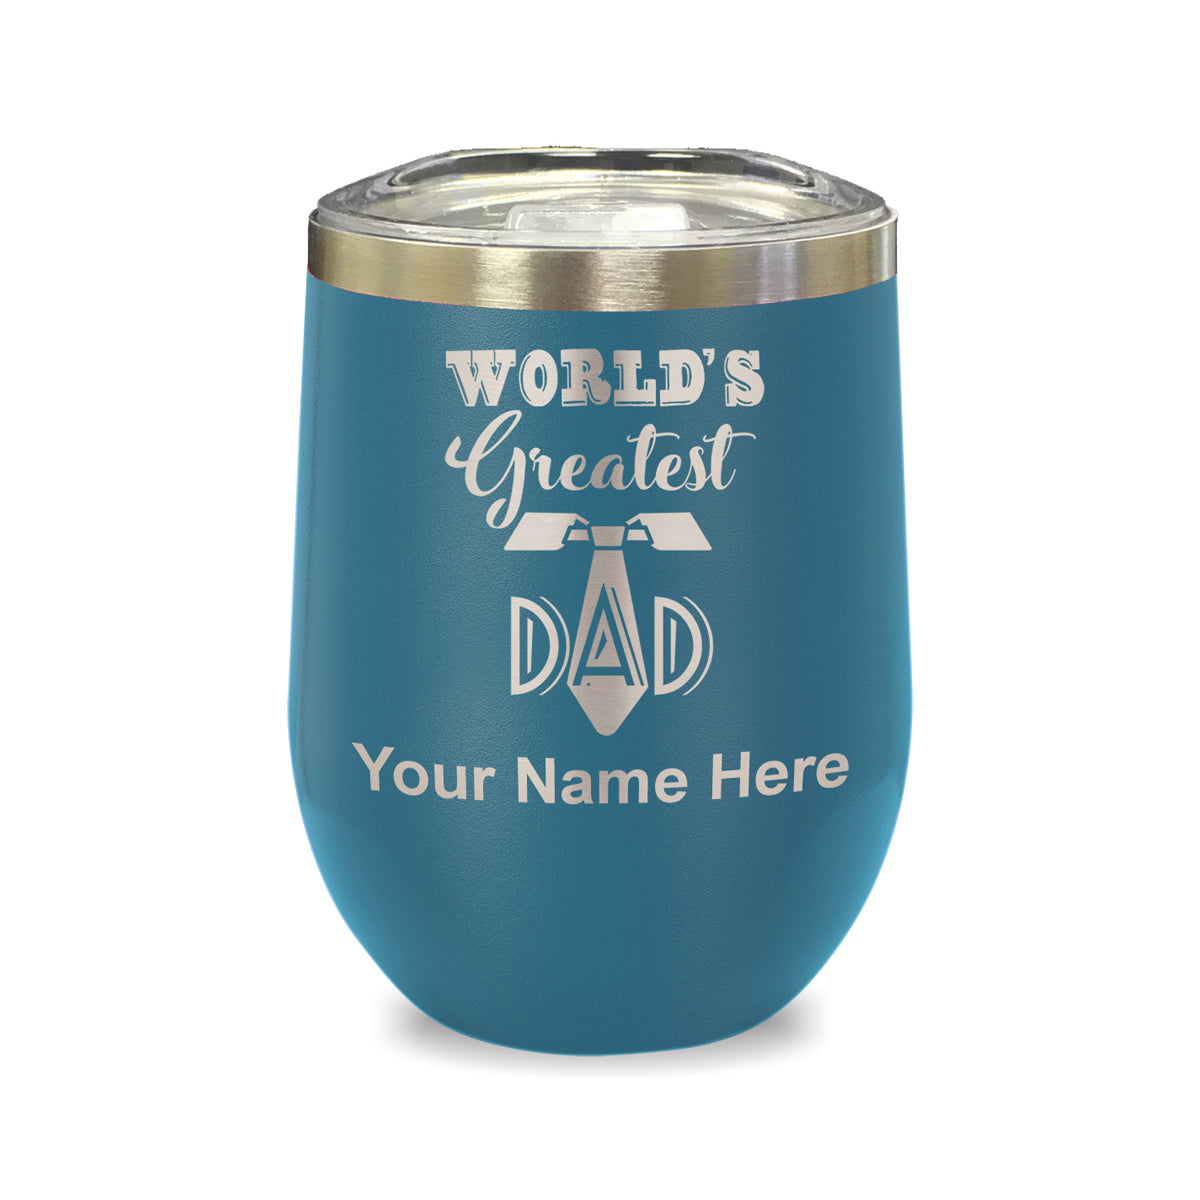 LaserGram Double Wall Stainless Steel Wine Glass, World's Greatest Dad, Personalized Engraving Included